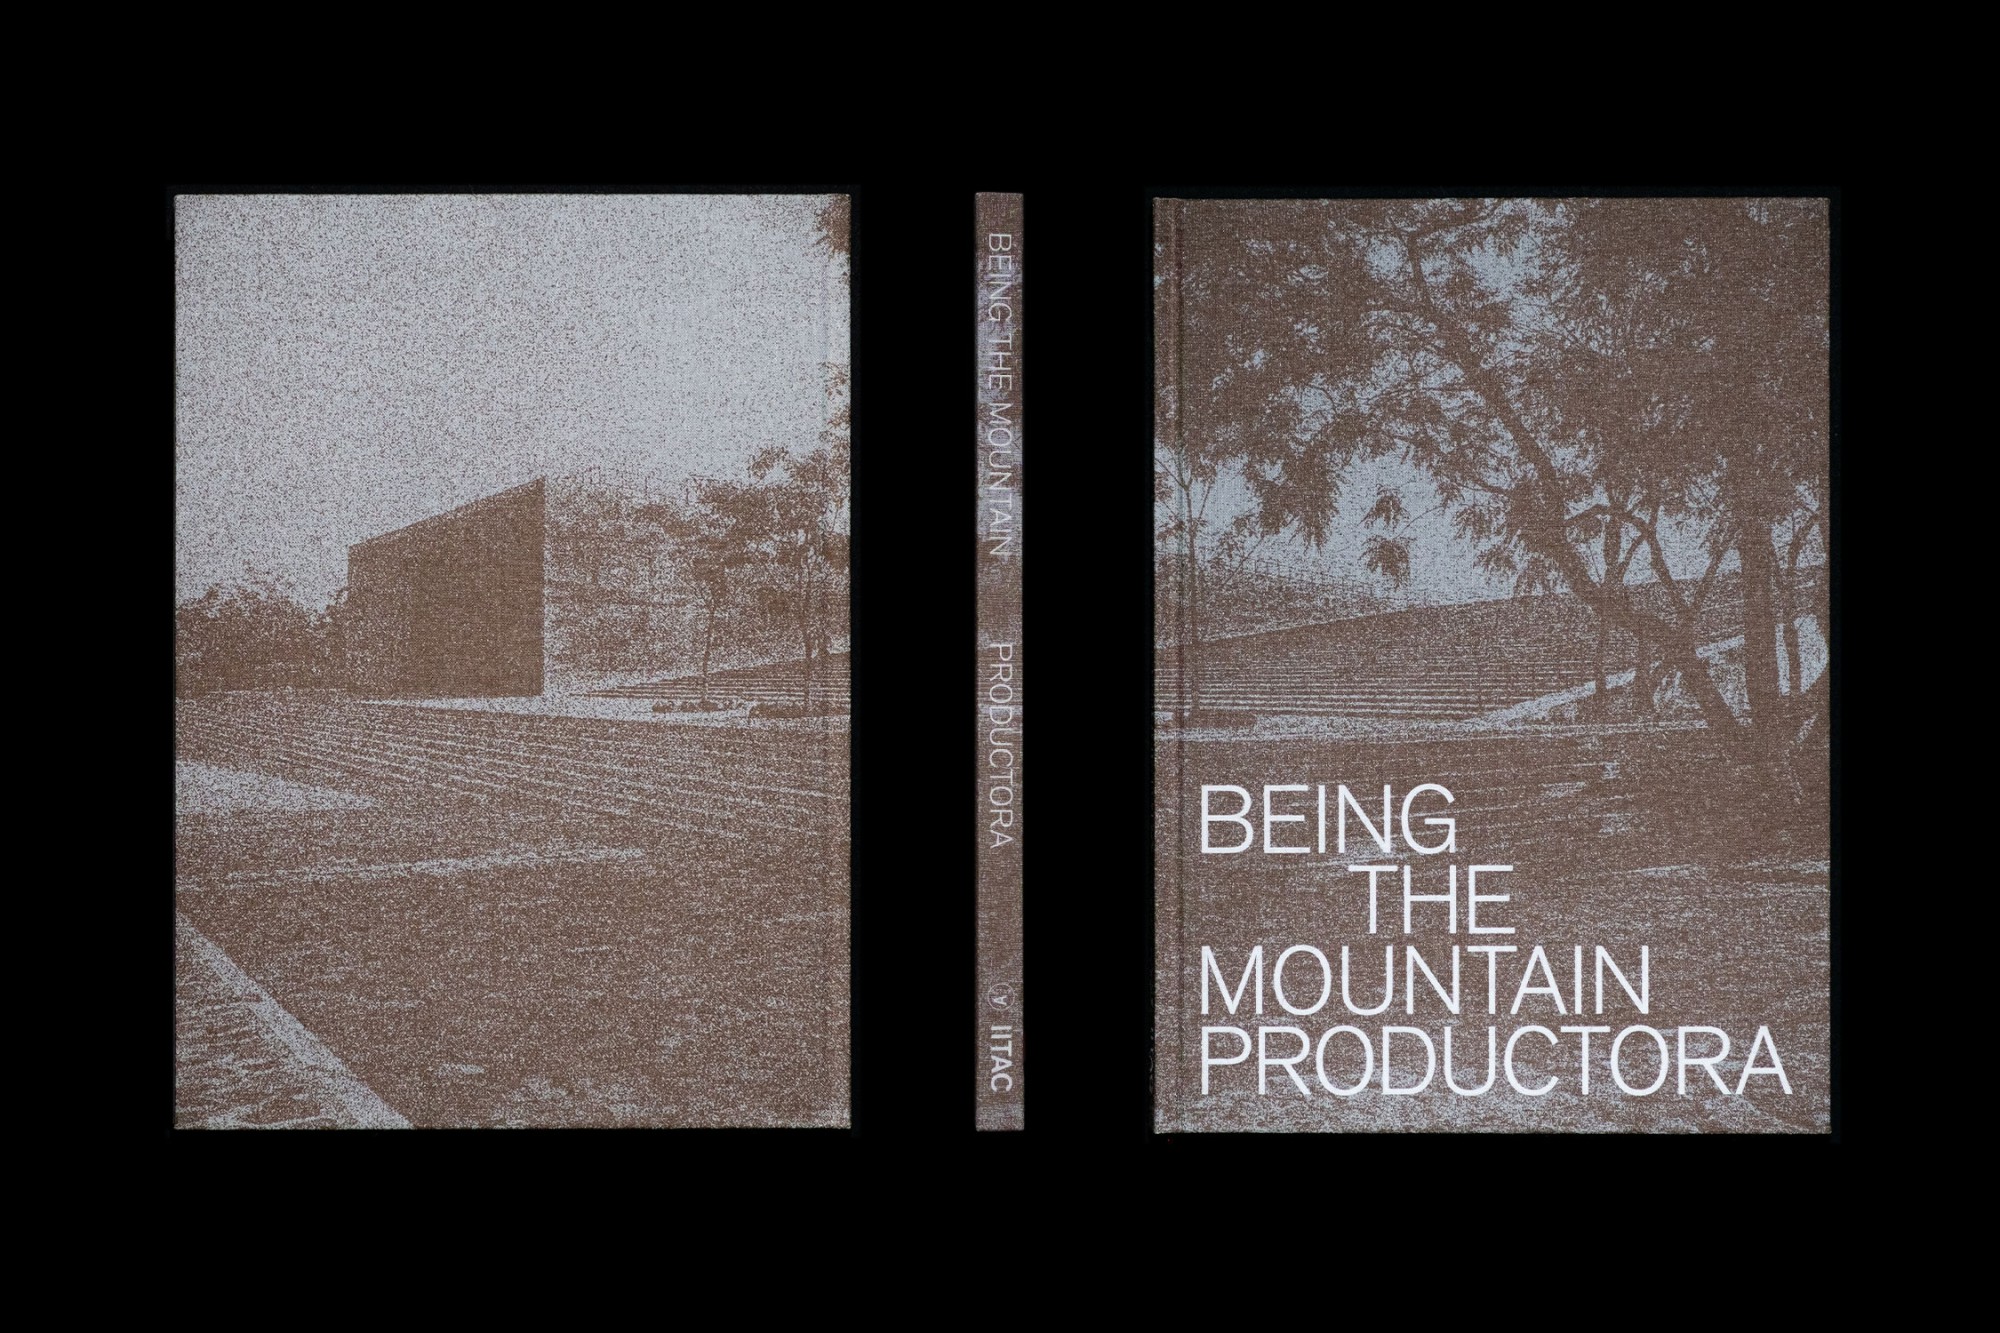 back, spine and front cover of the book 'Being the Mountain' by Productora